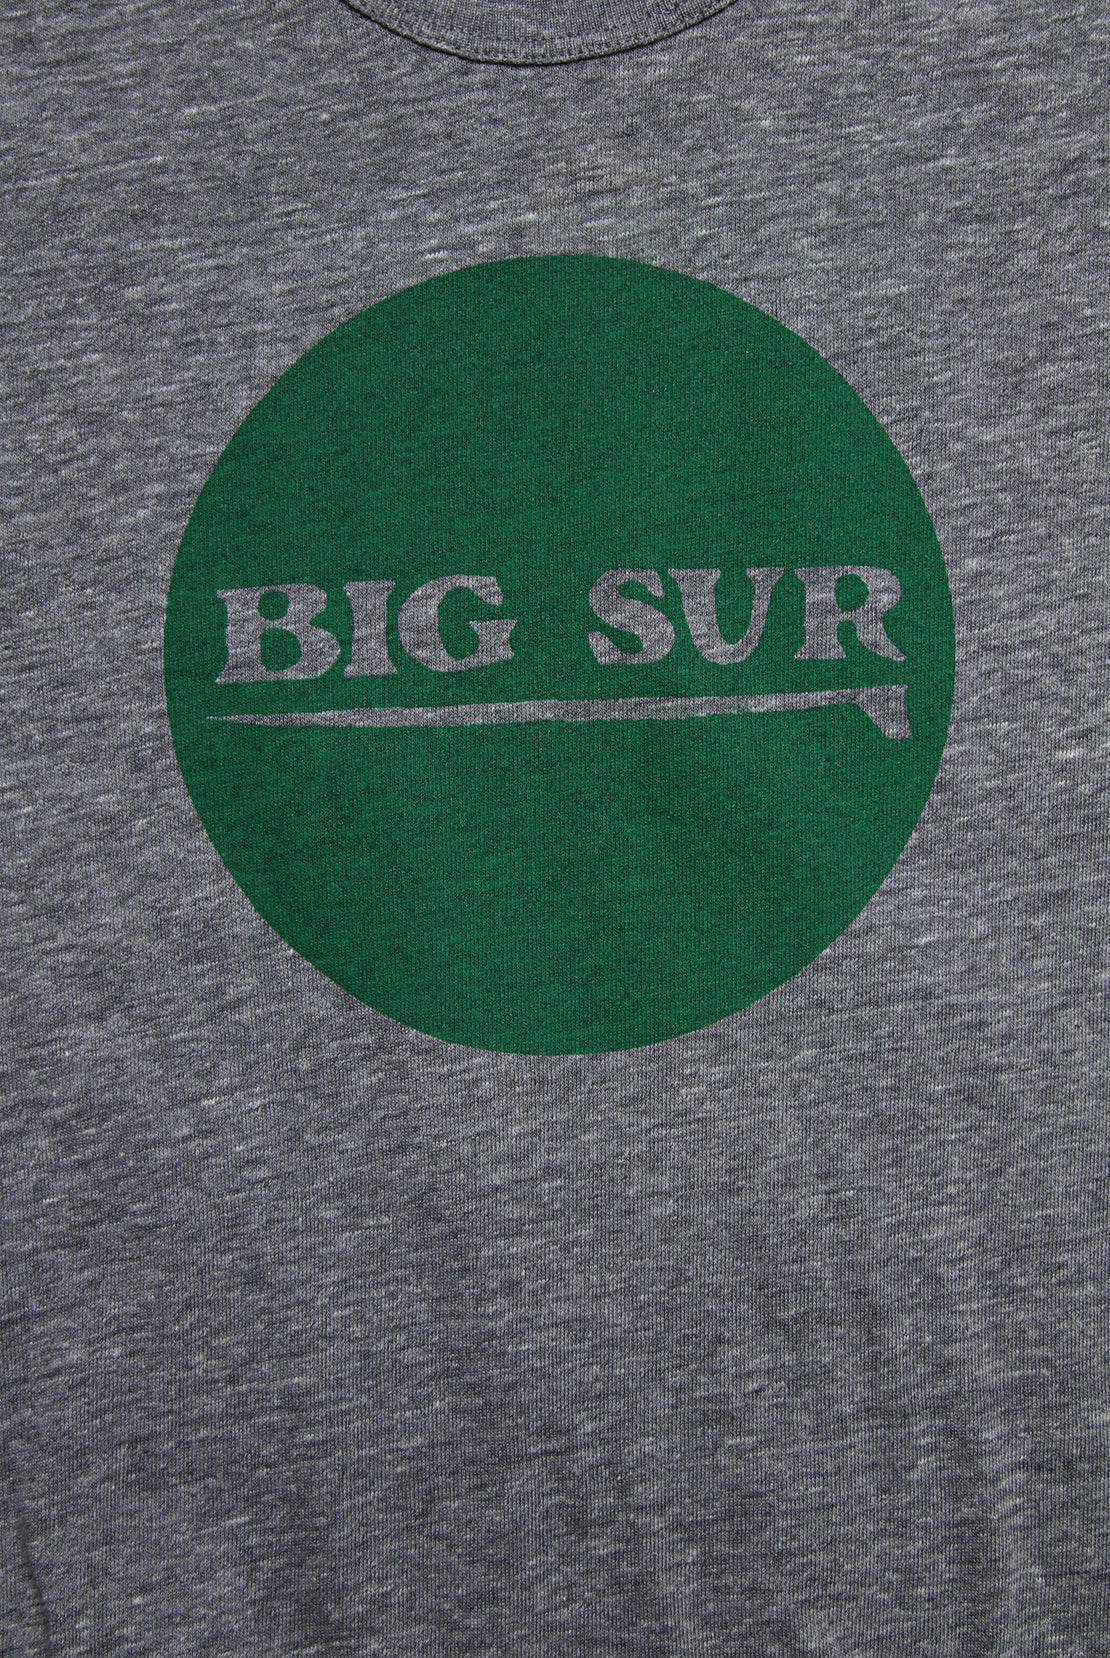 Graphic Tee - Big Sur - Alchemy Design - STAG Provisions - Tops - Graphic Tee